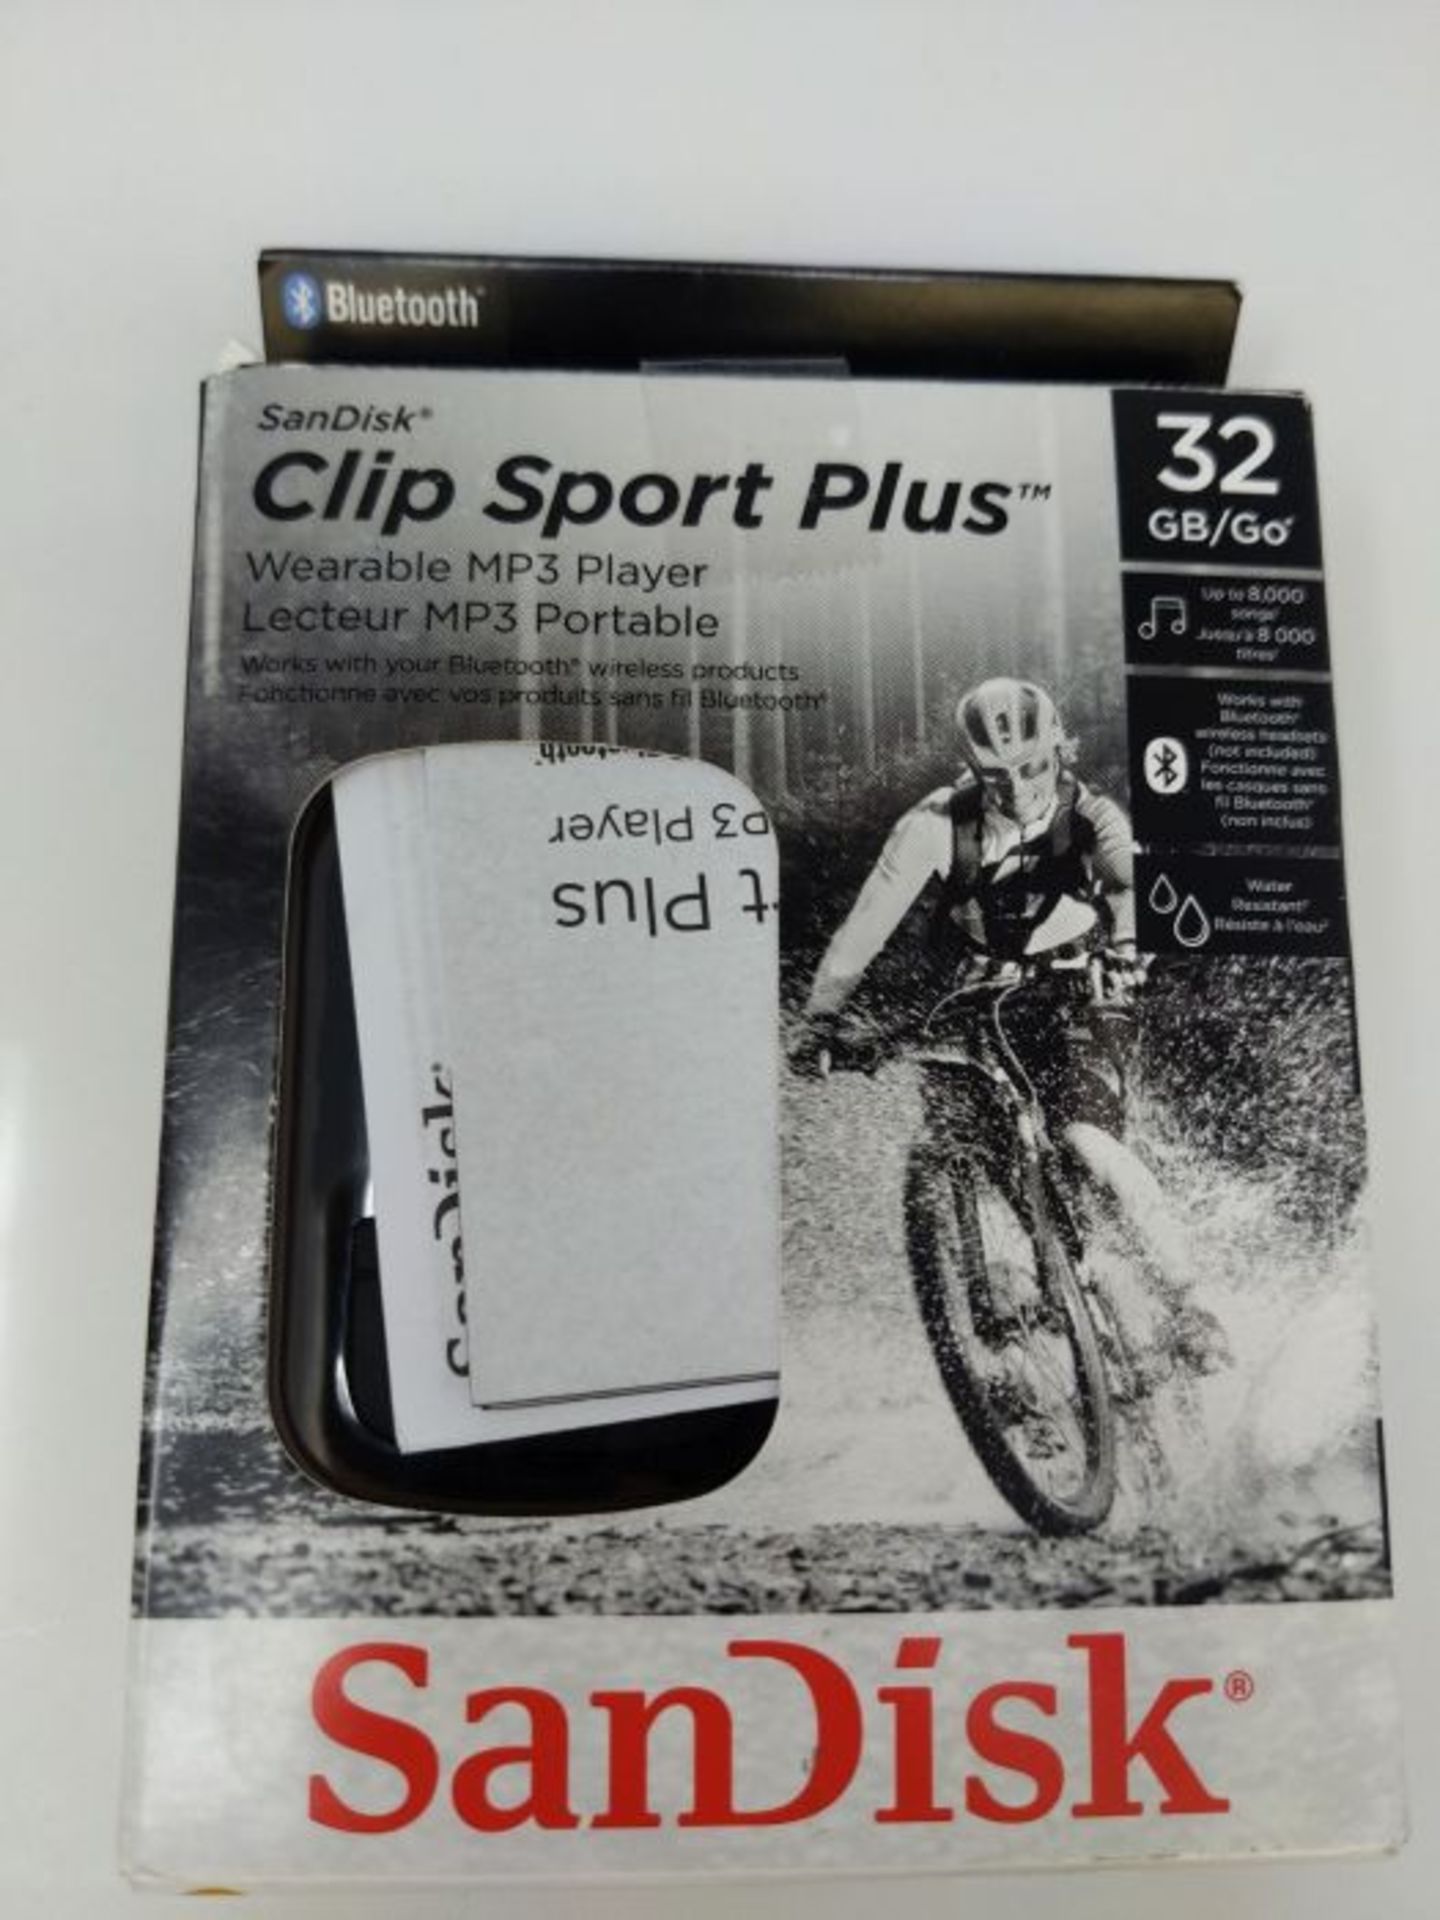 SanDisk Clip Sport Plus 32GB Wearable, Bluetooth MP3 Player - Black - Image 2 of 3